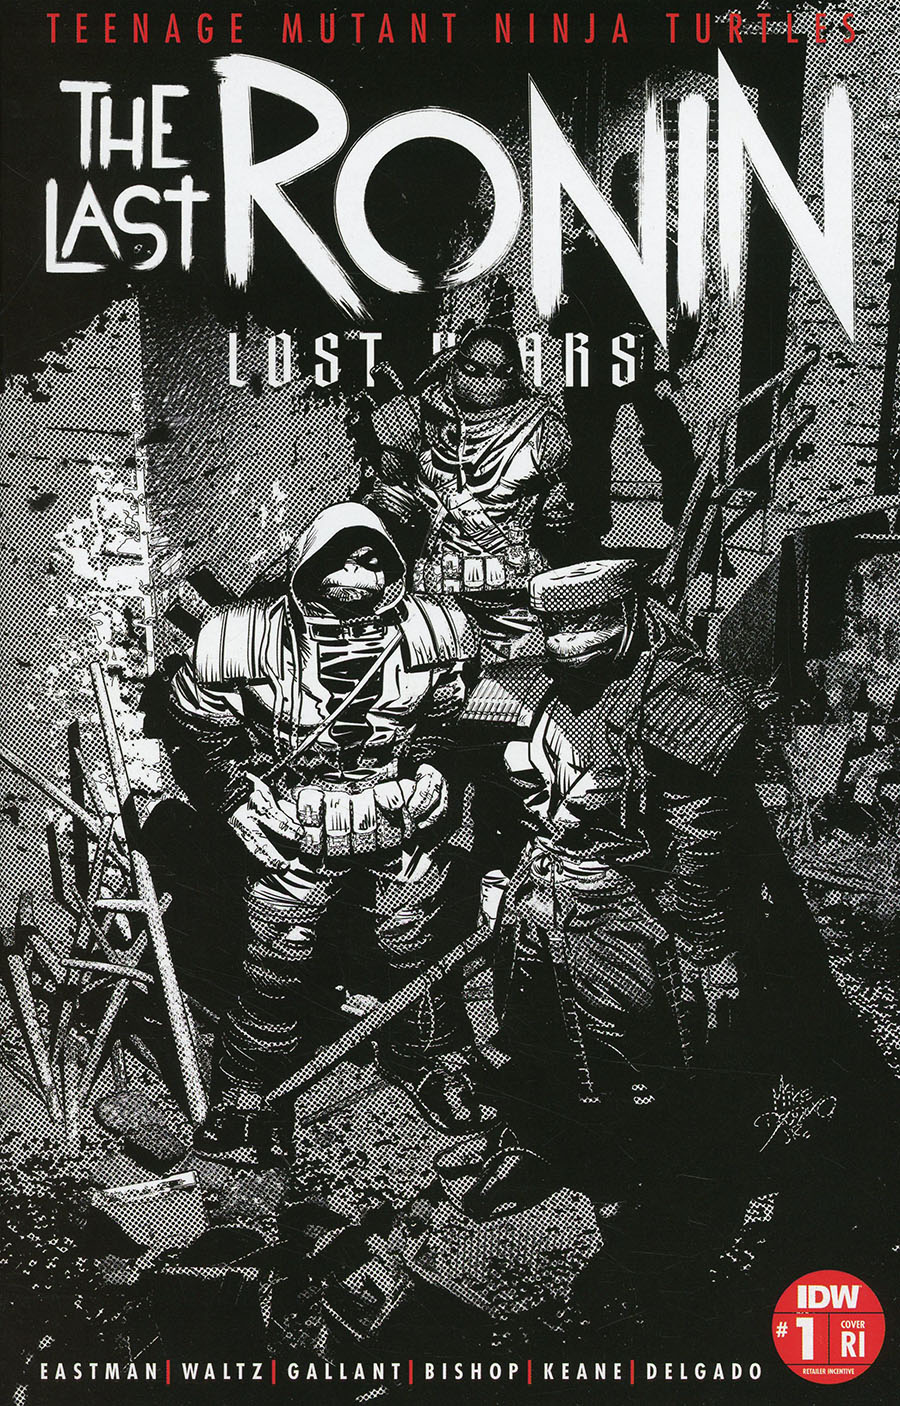 Teenage Mutant Ninja Turtles The Last Ronin The Lost Years #1 Cover E Incentive Mike Deodato Jr Black & White Variant Cover